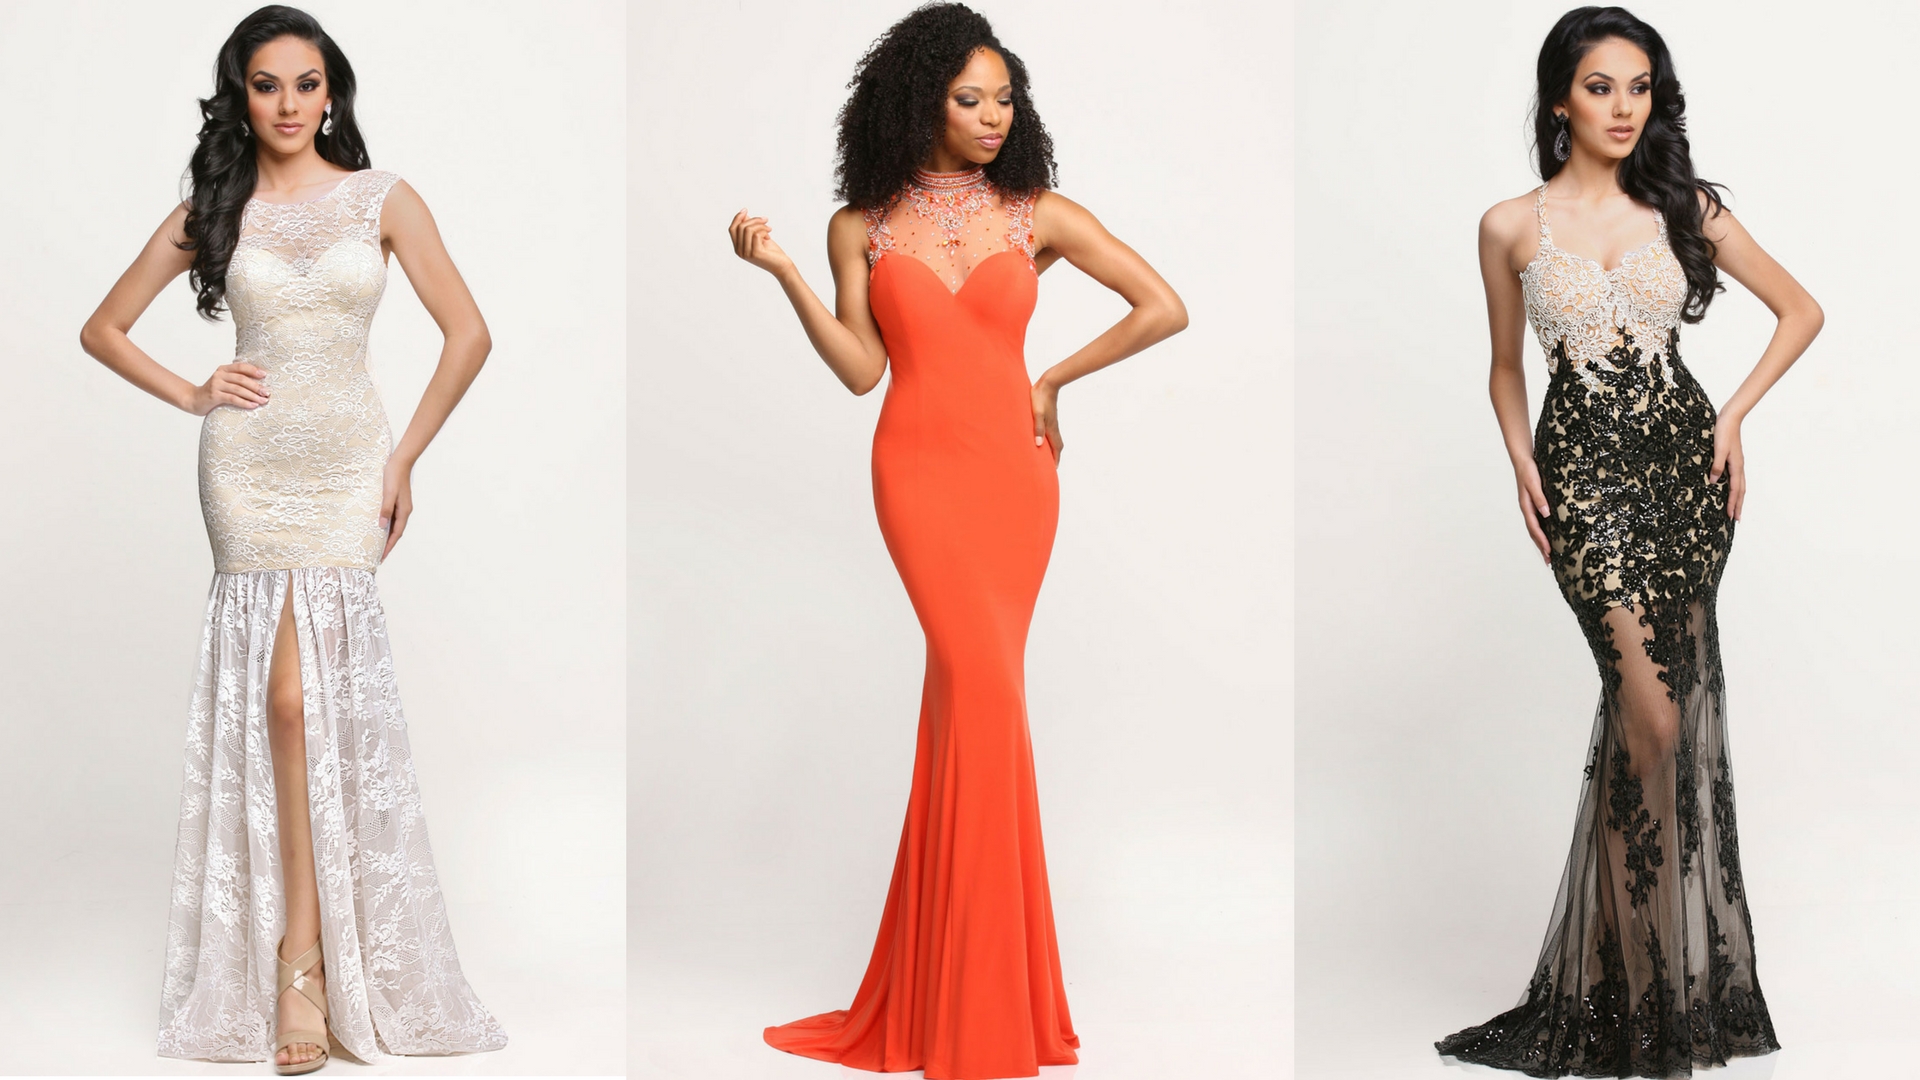 Daring, not Dangerous: 11 Ultra-Chic Prom Gowns with Class